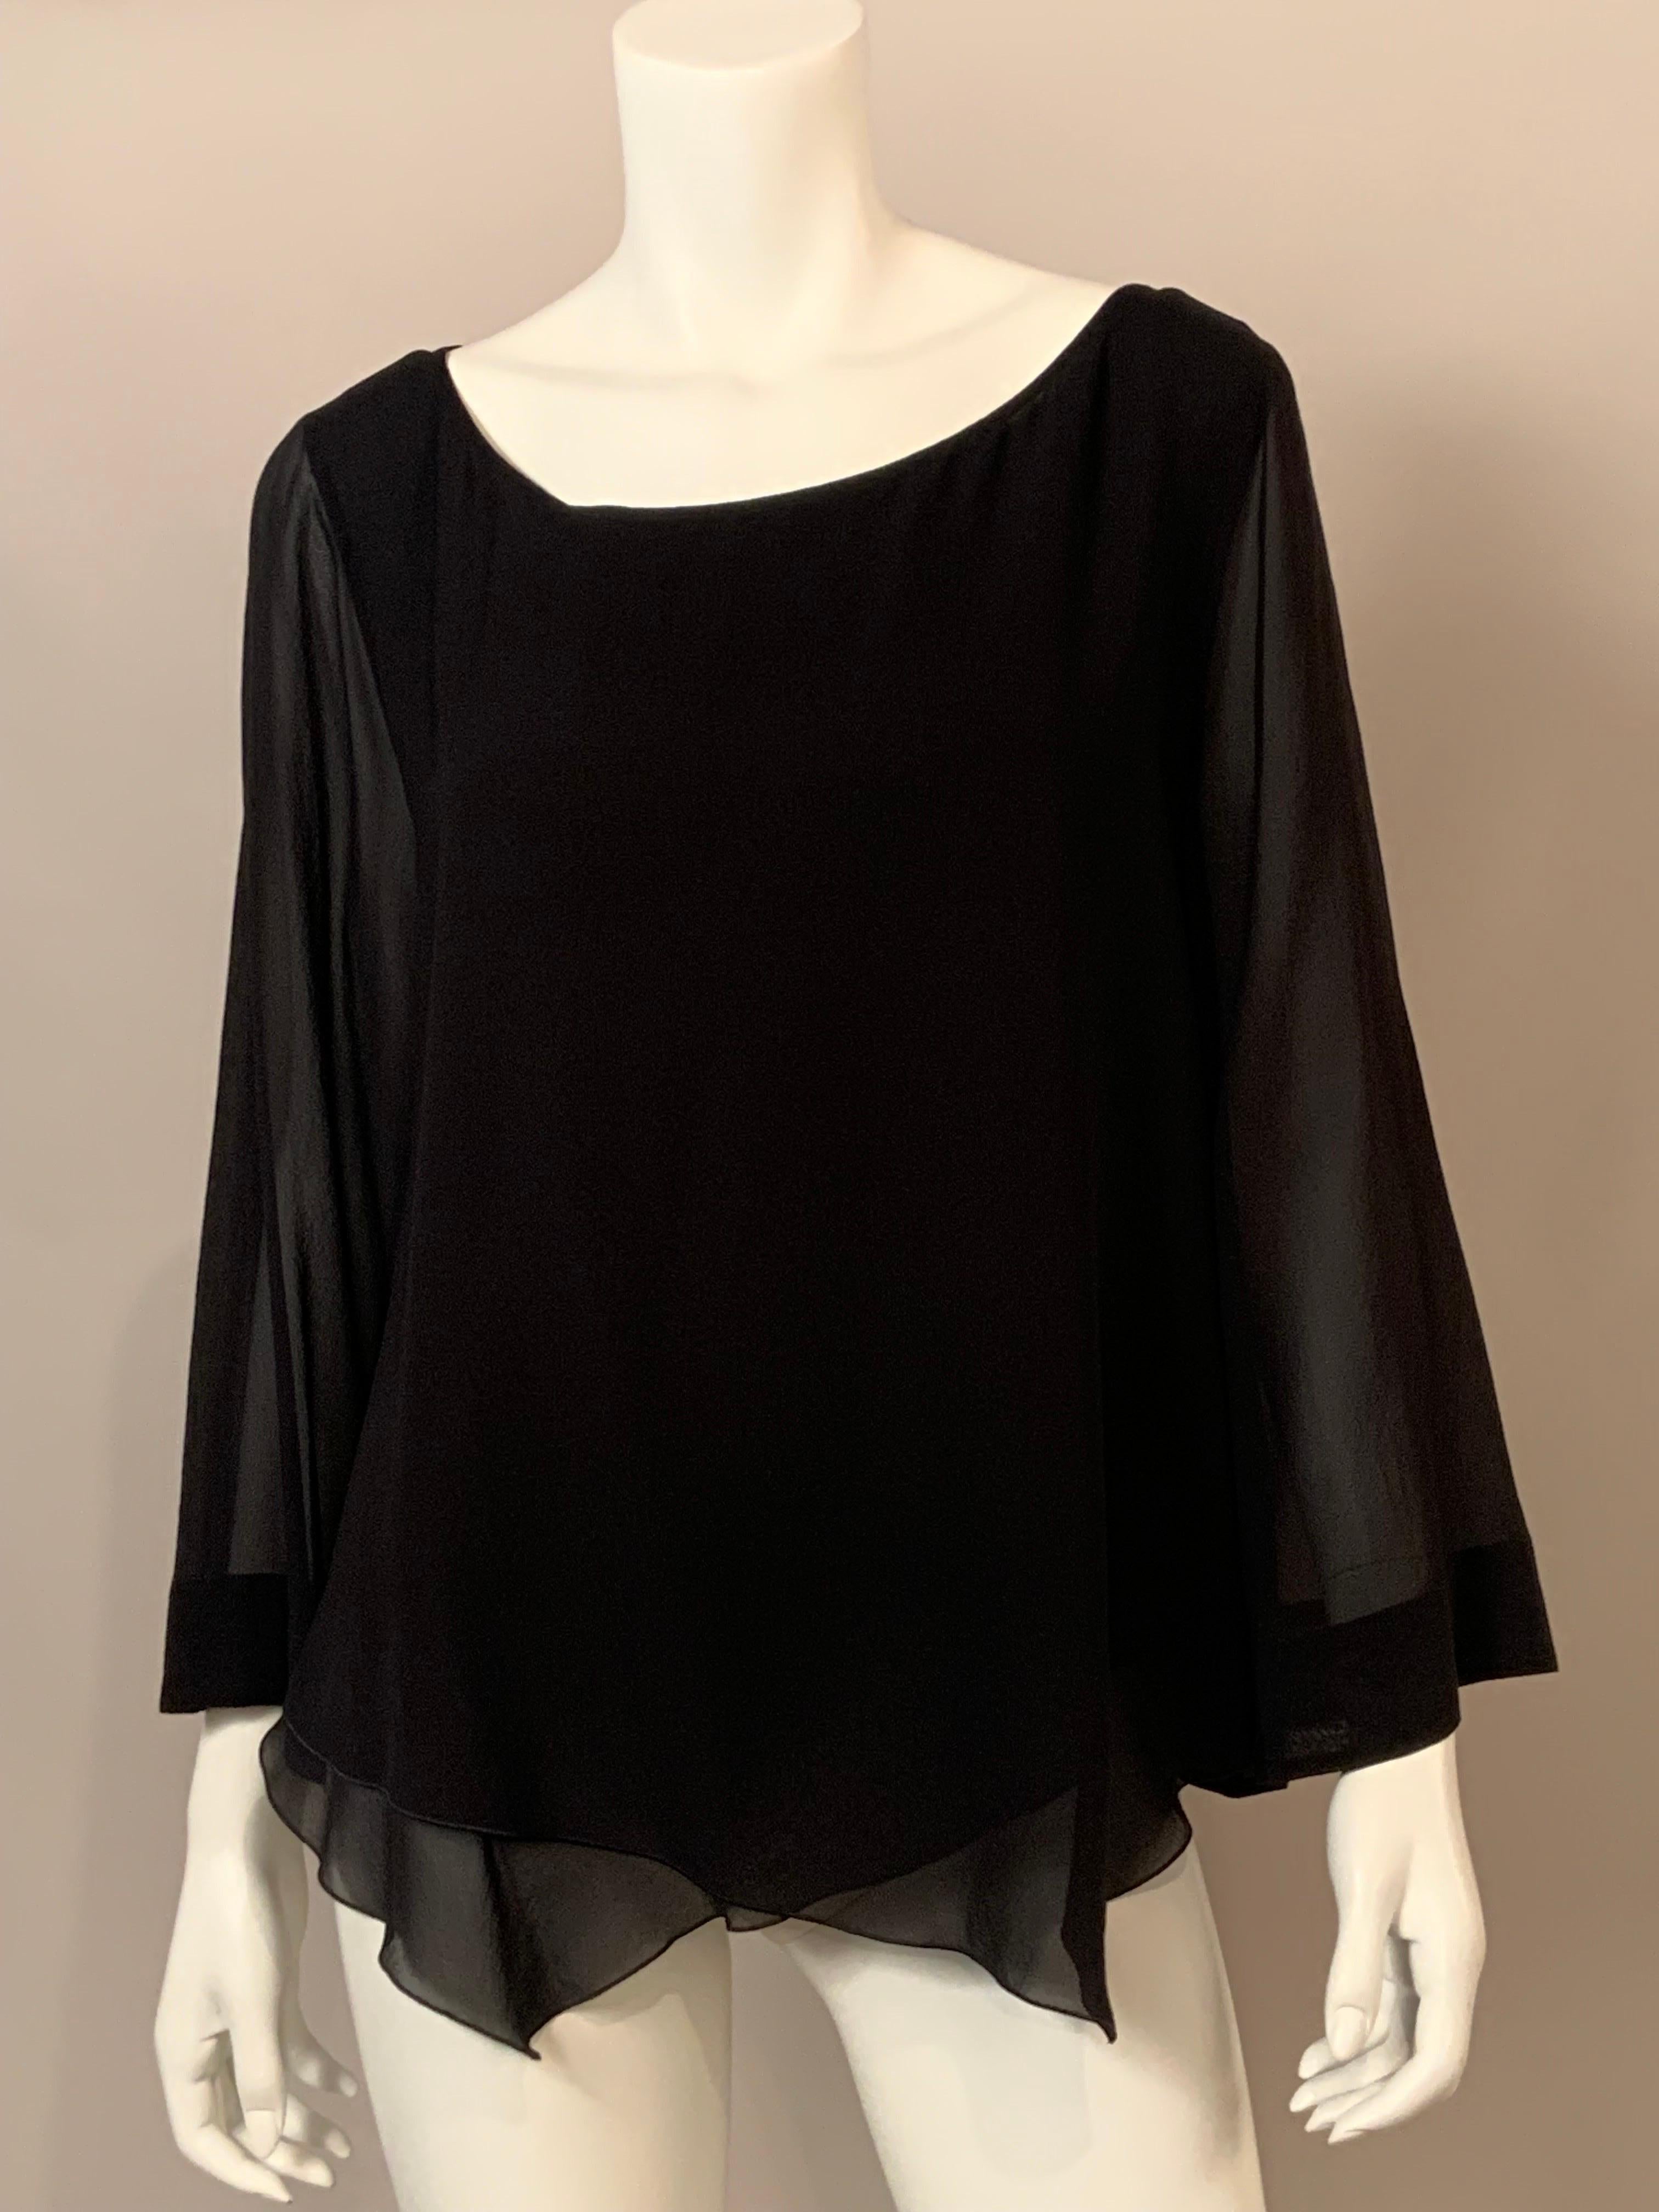 This elegant black silk chiffon tunic top from Giorgio Armani is so feminine.  The body is made from two layers of silk chiffon with a pointed hemline and the sleeves are a single layer of chiffon.  It goes on over your head, no closures, just